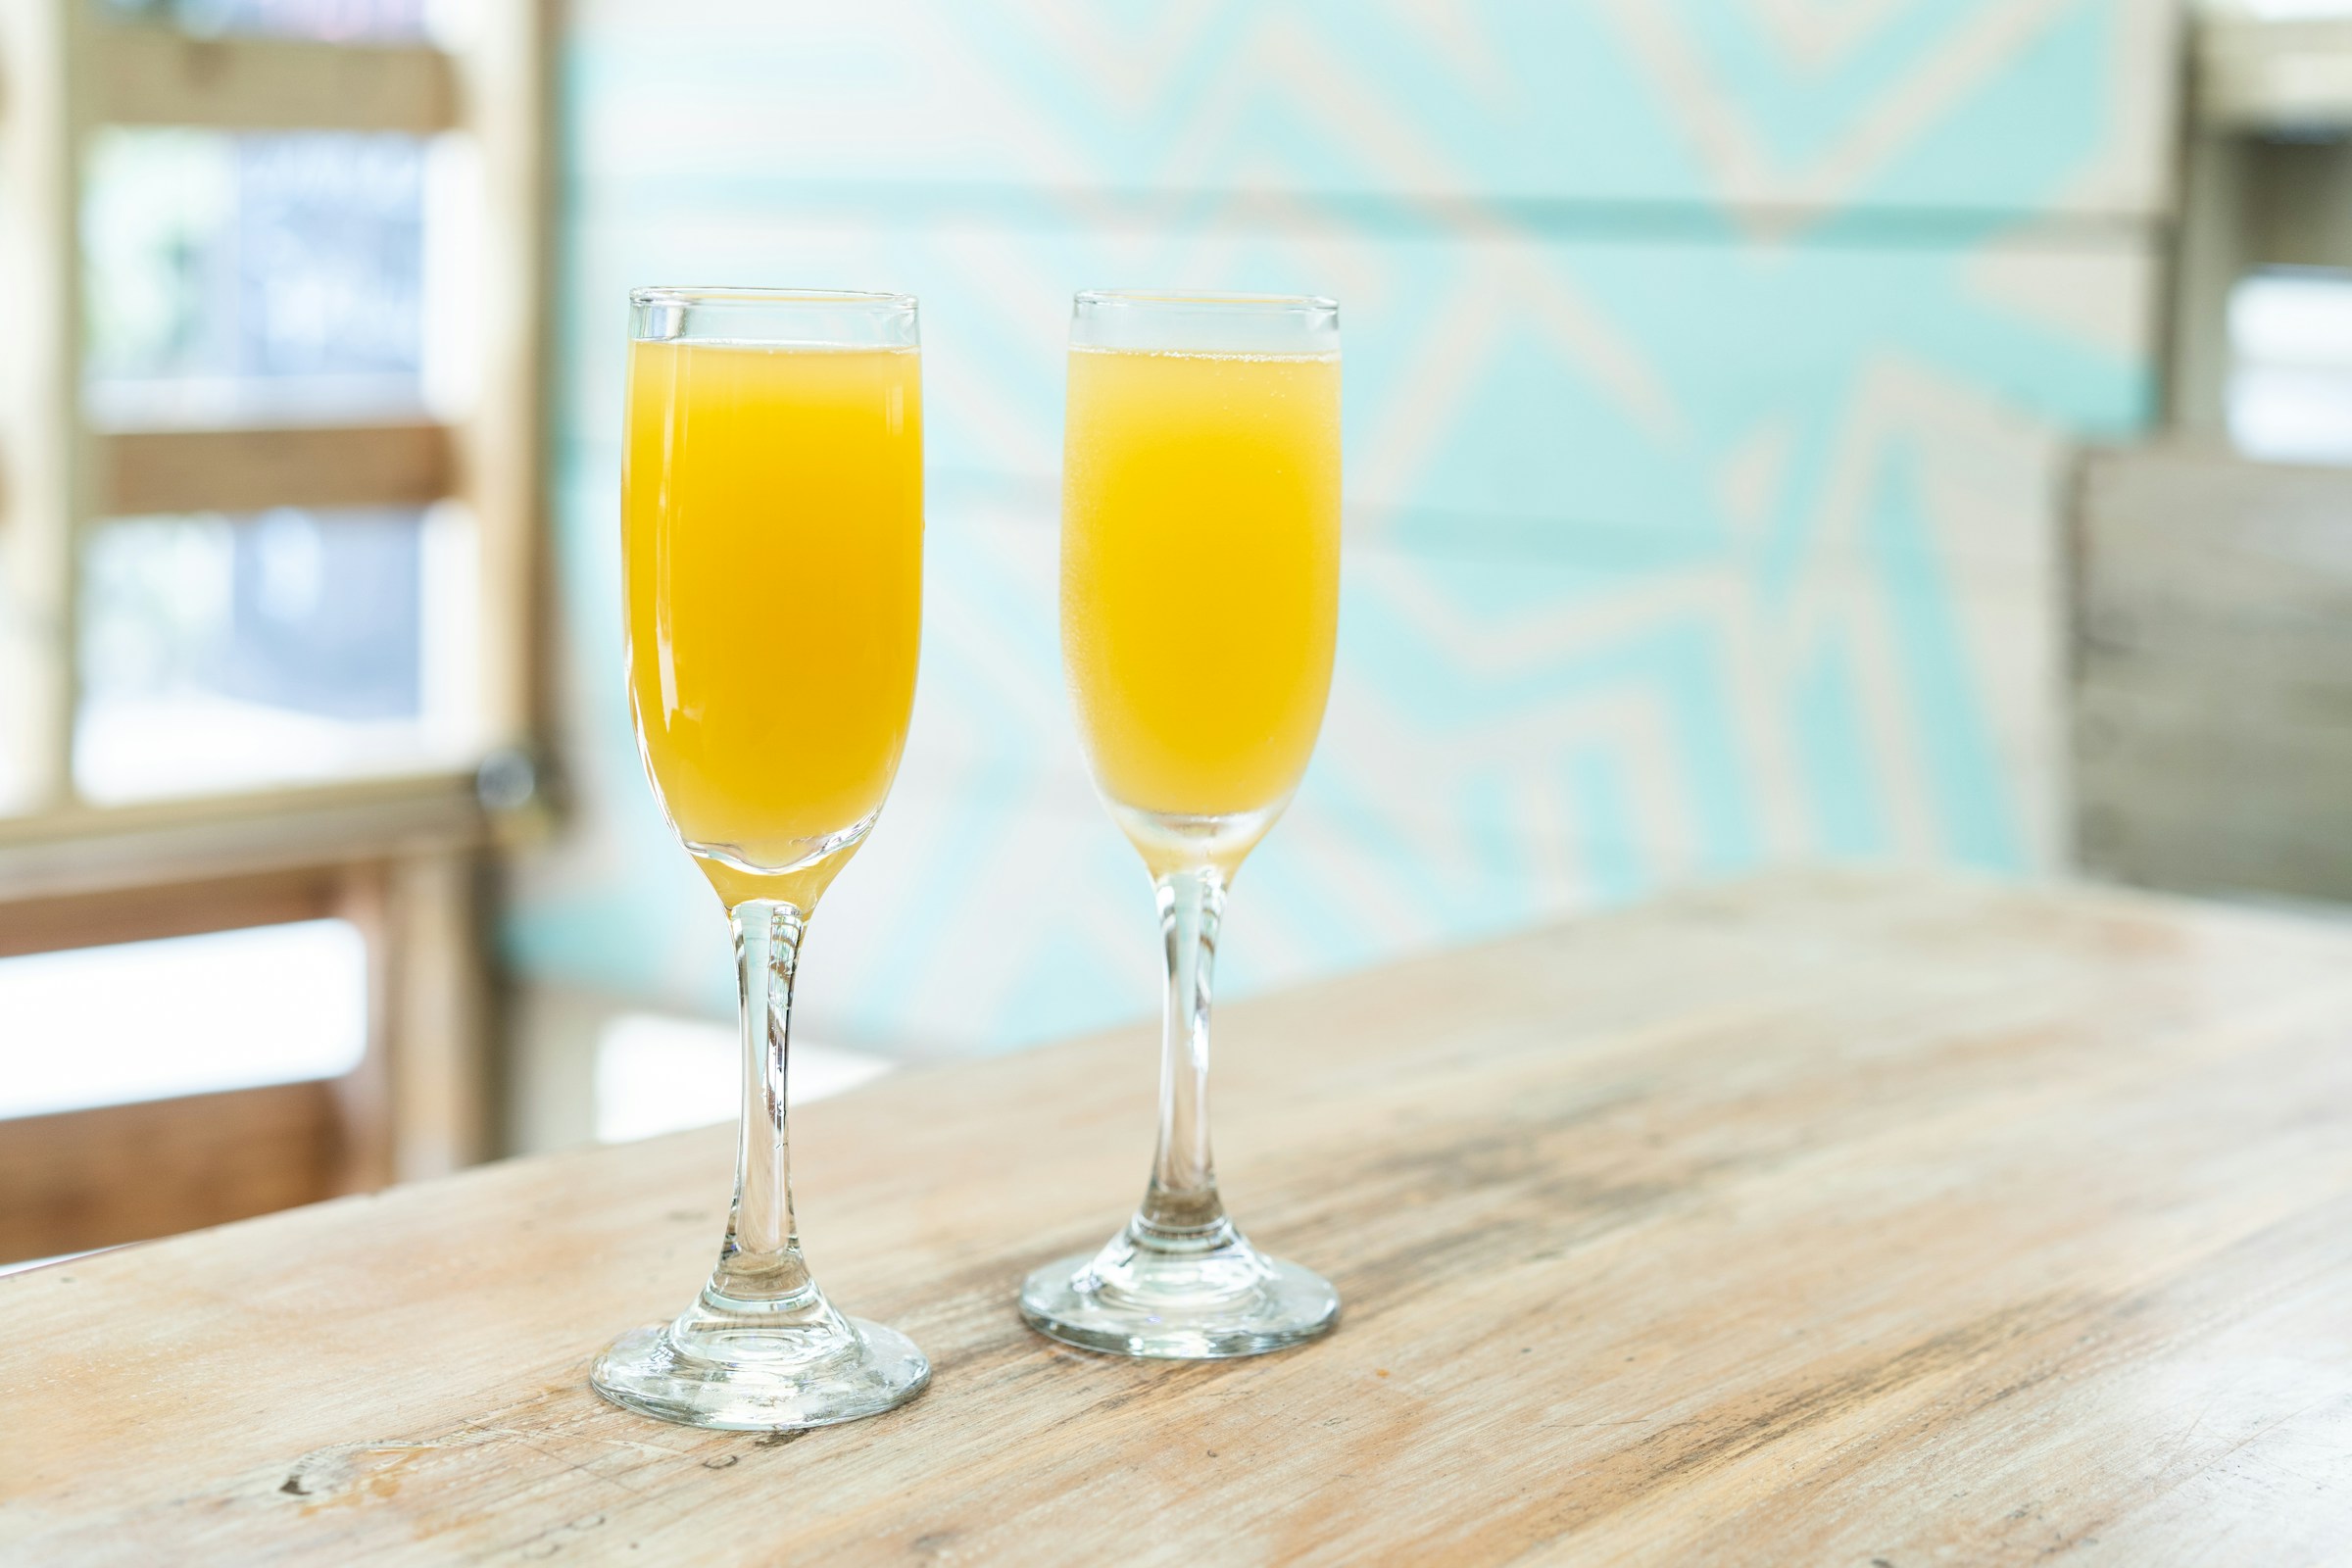 Mimosas on a table | Source: Unsplash